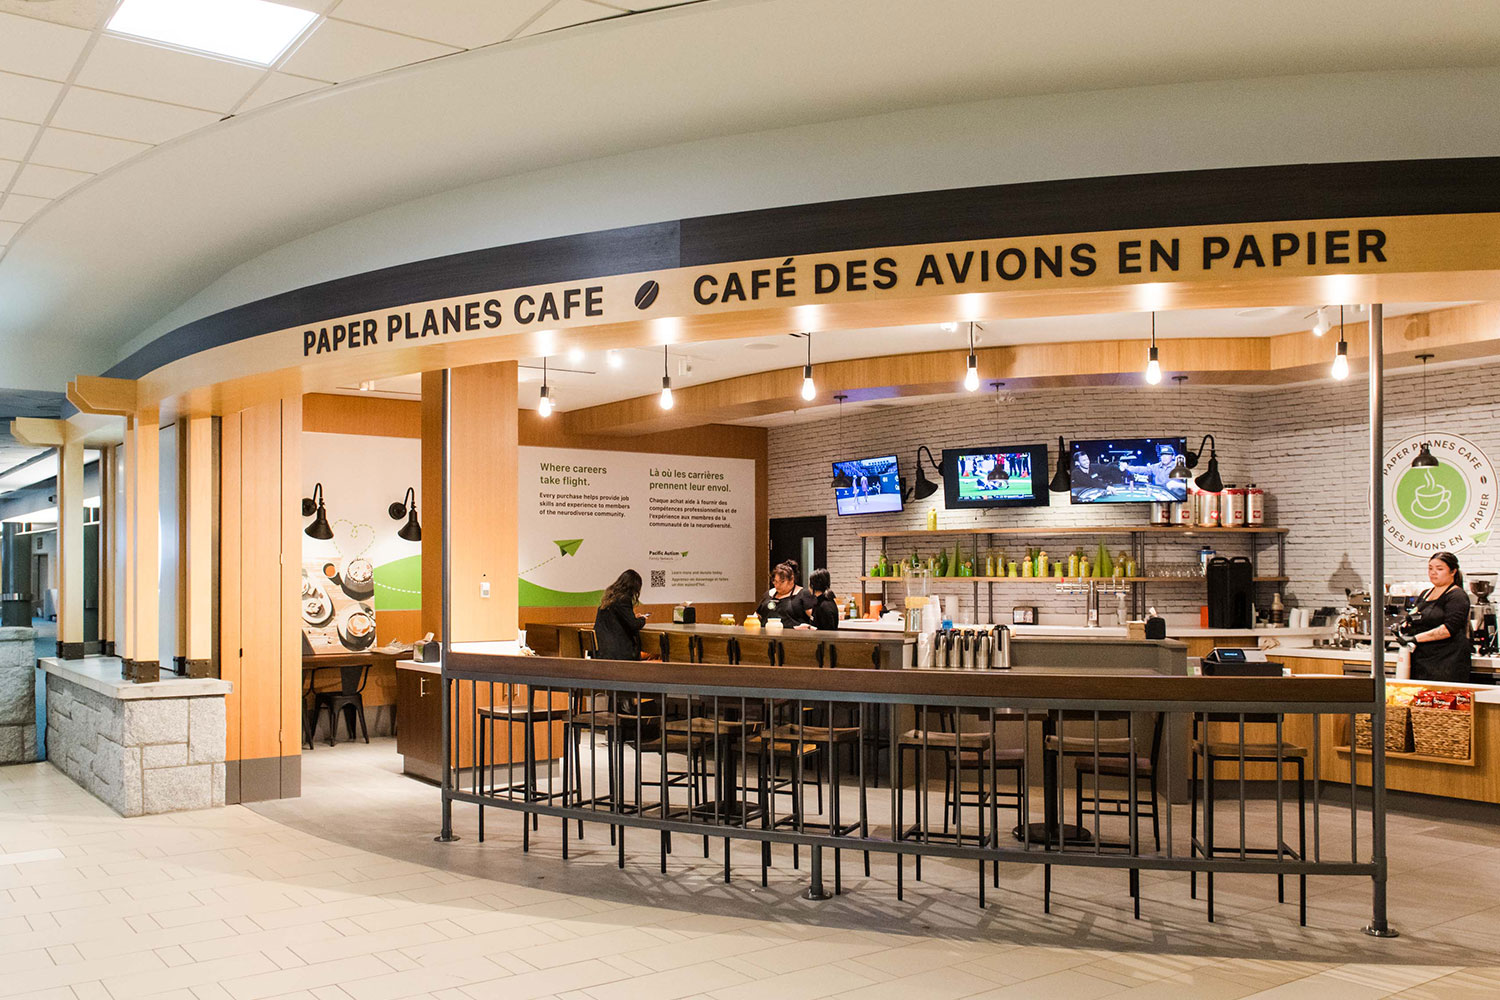 The Paper Planes Cafe located within the Vancouver International Airpot